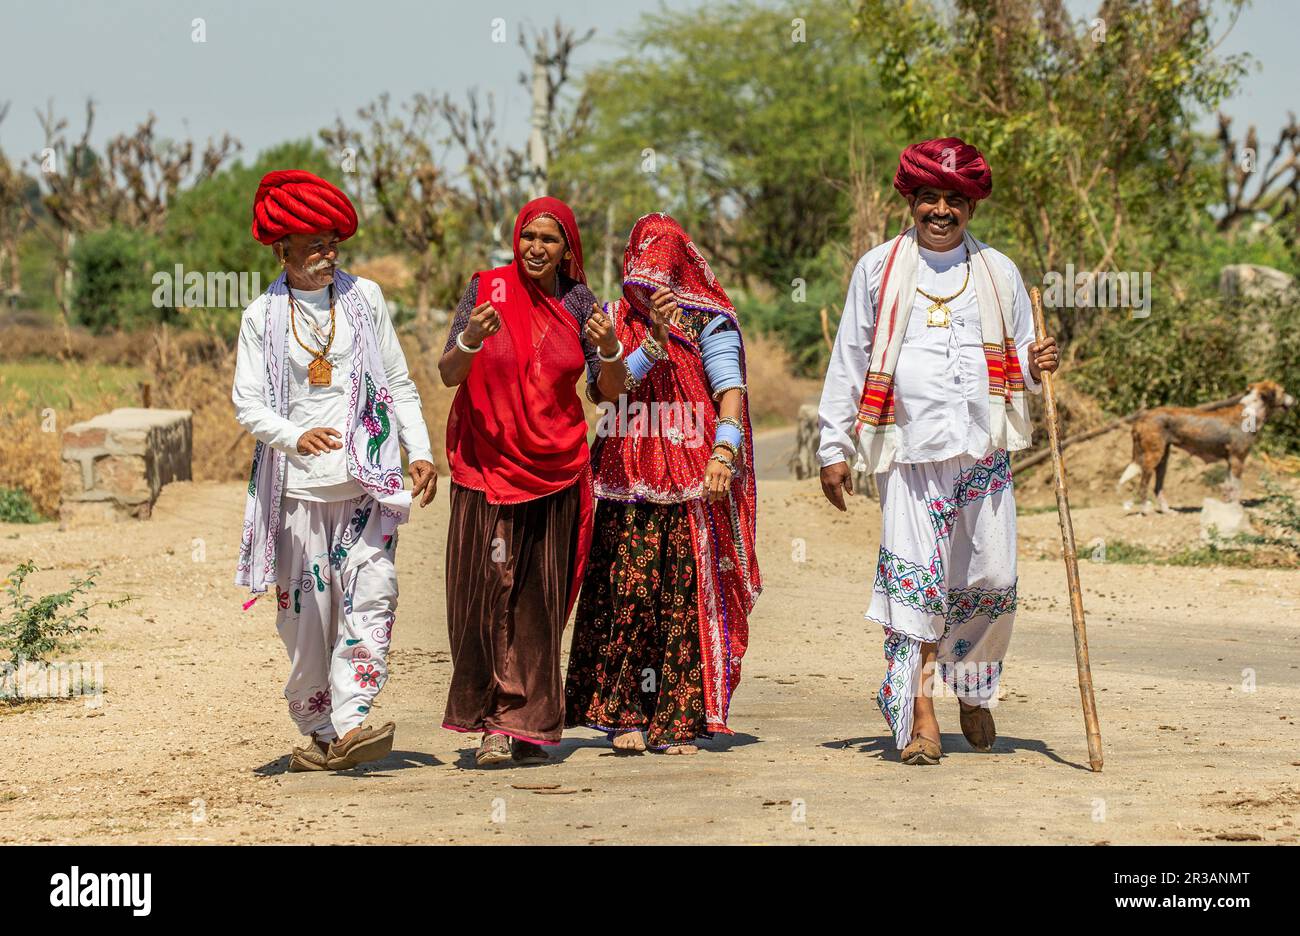 Men and women of the Rabari ethnic group in national dress are walking along the road. Stock Photo